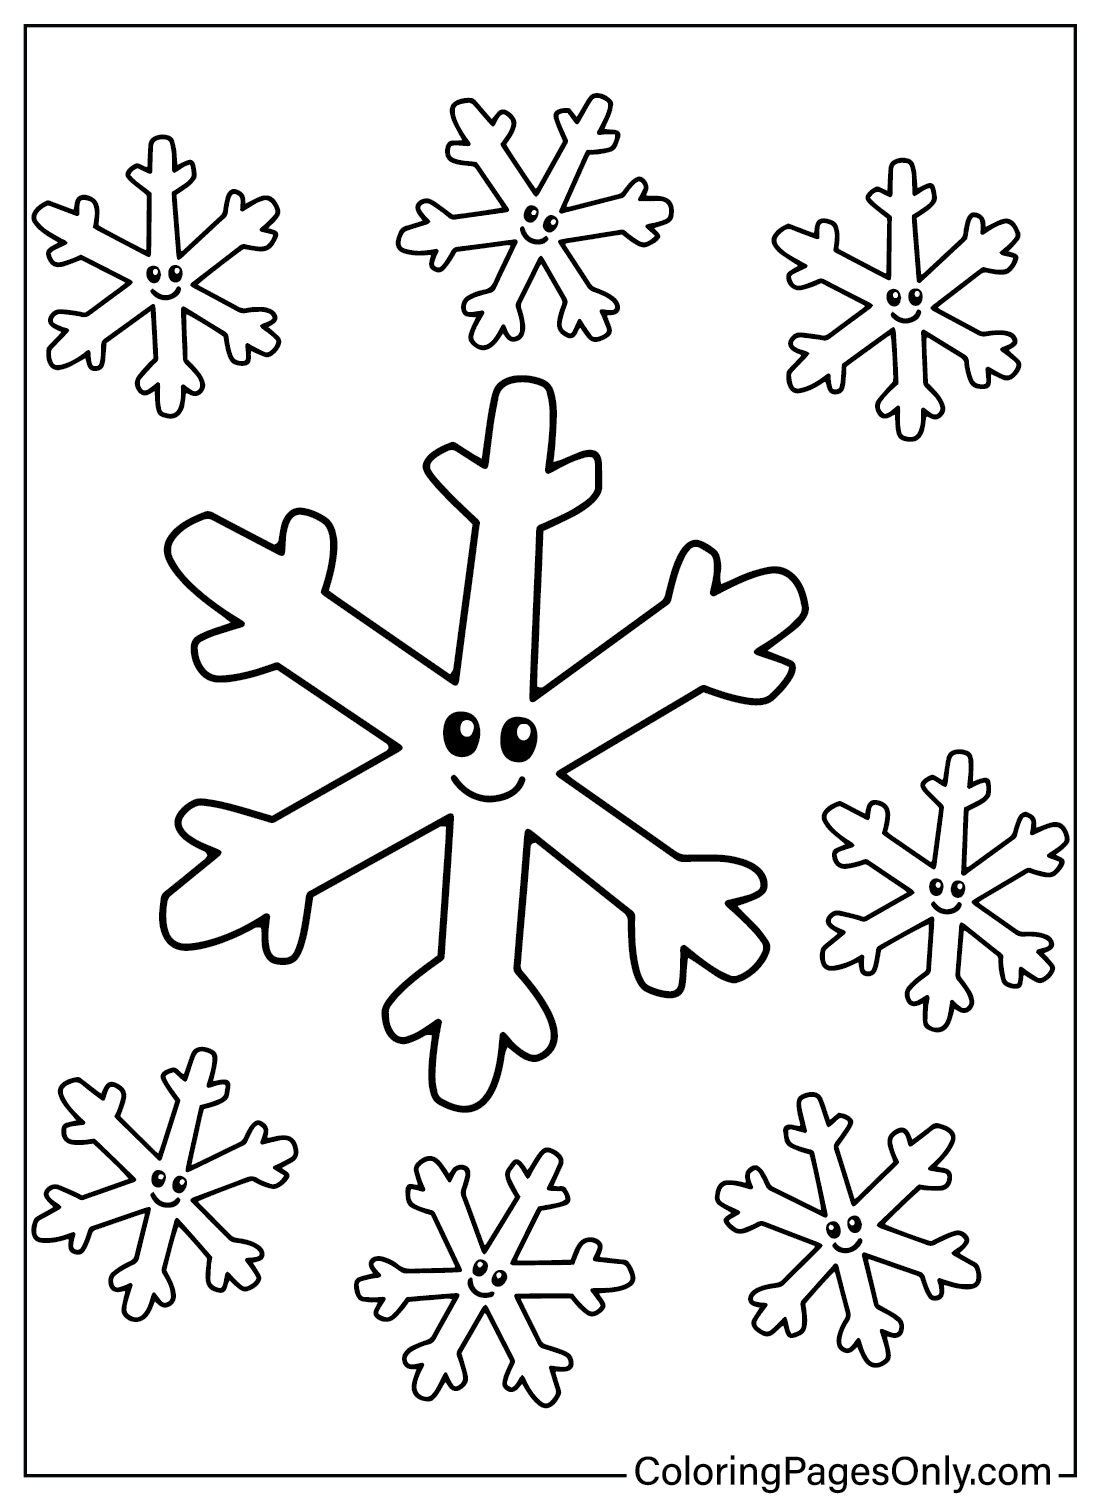 Snowflake Cute Coloring Page from Nature & Seasons